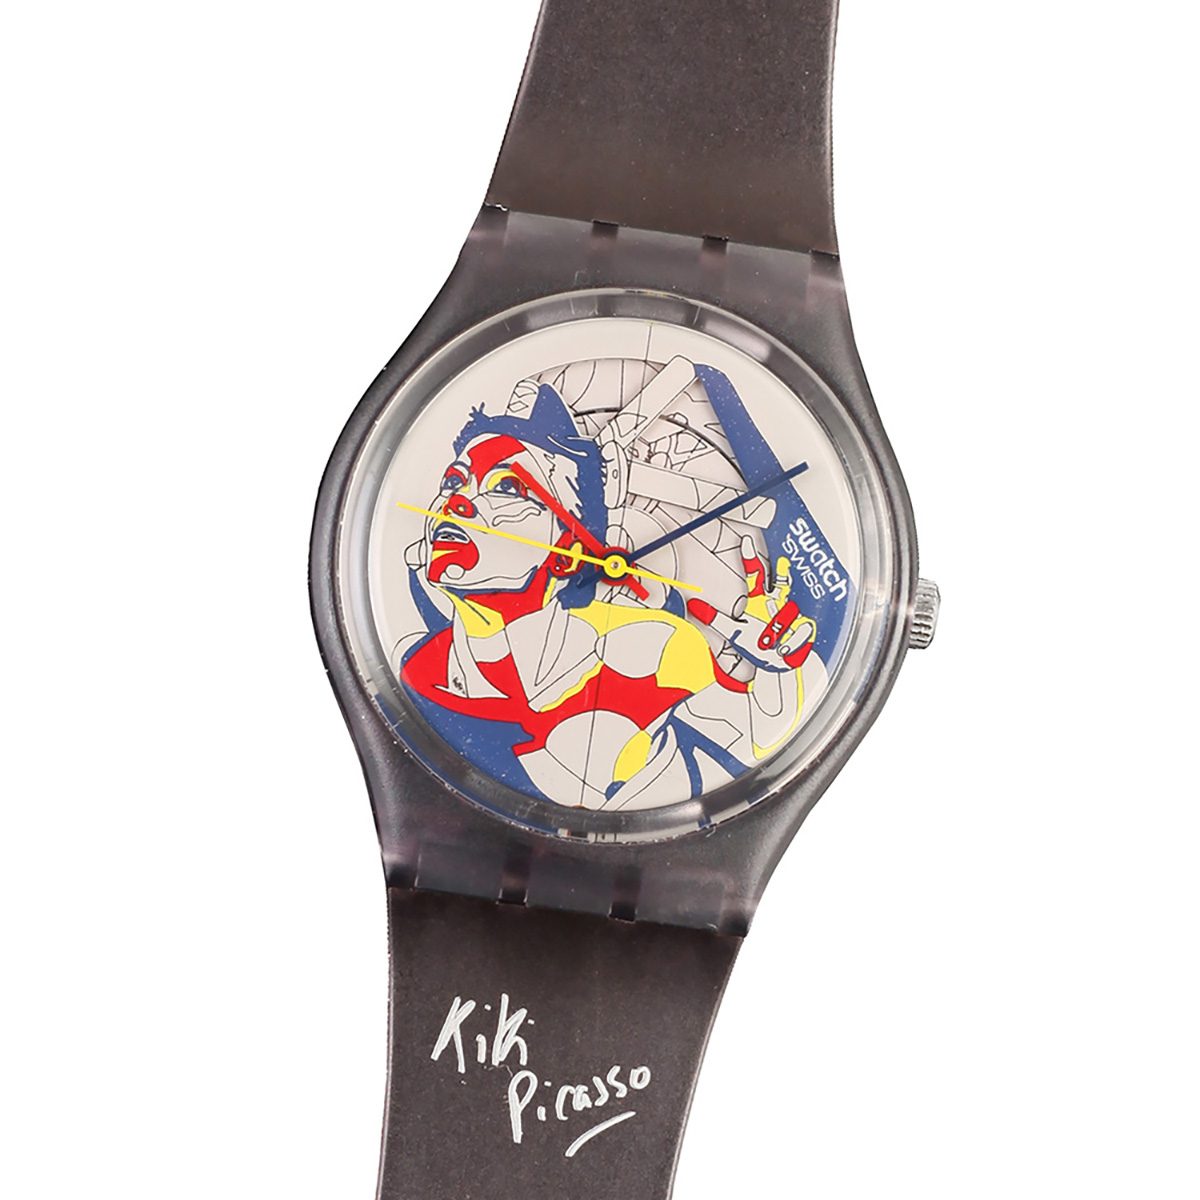 The Art of the Watch: Introducing Swatch’s Jean-Michel Basquiat Tribute ...